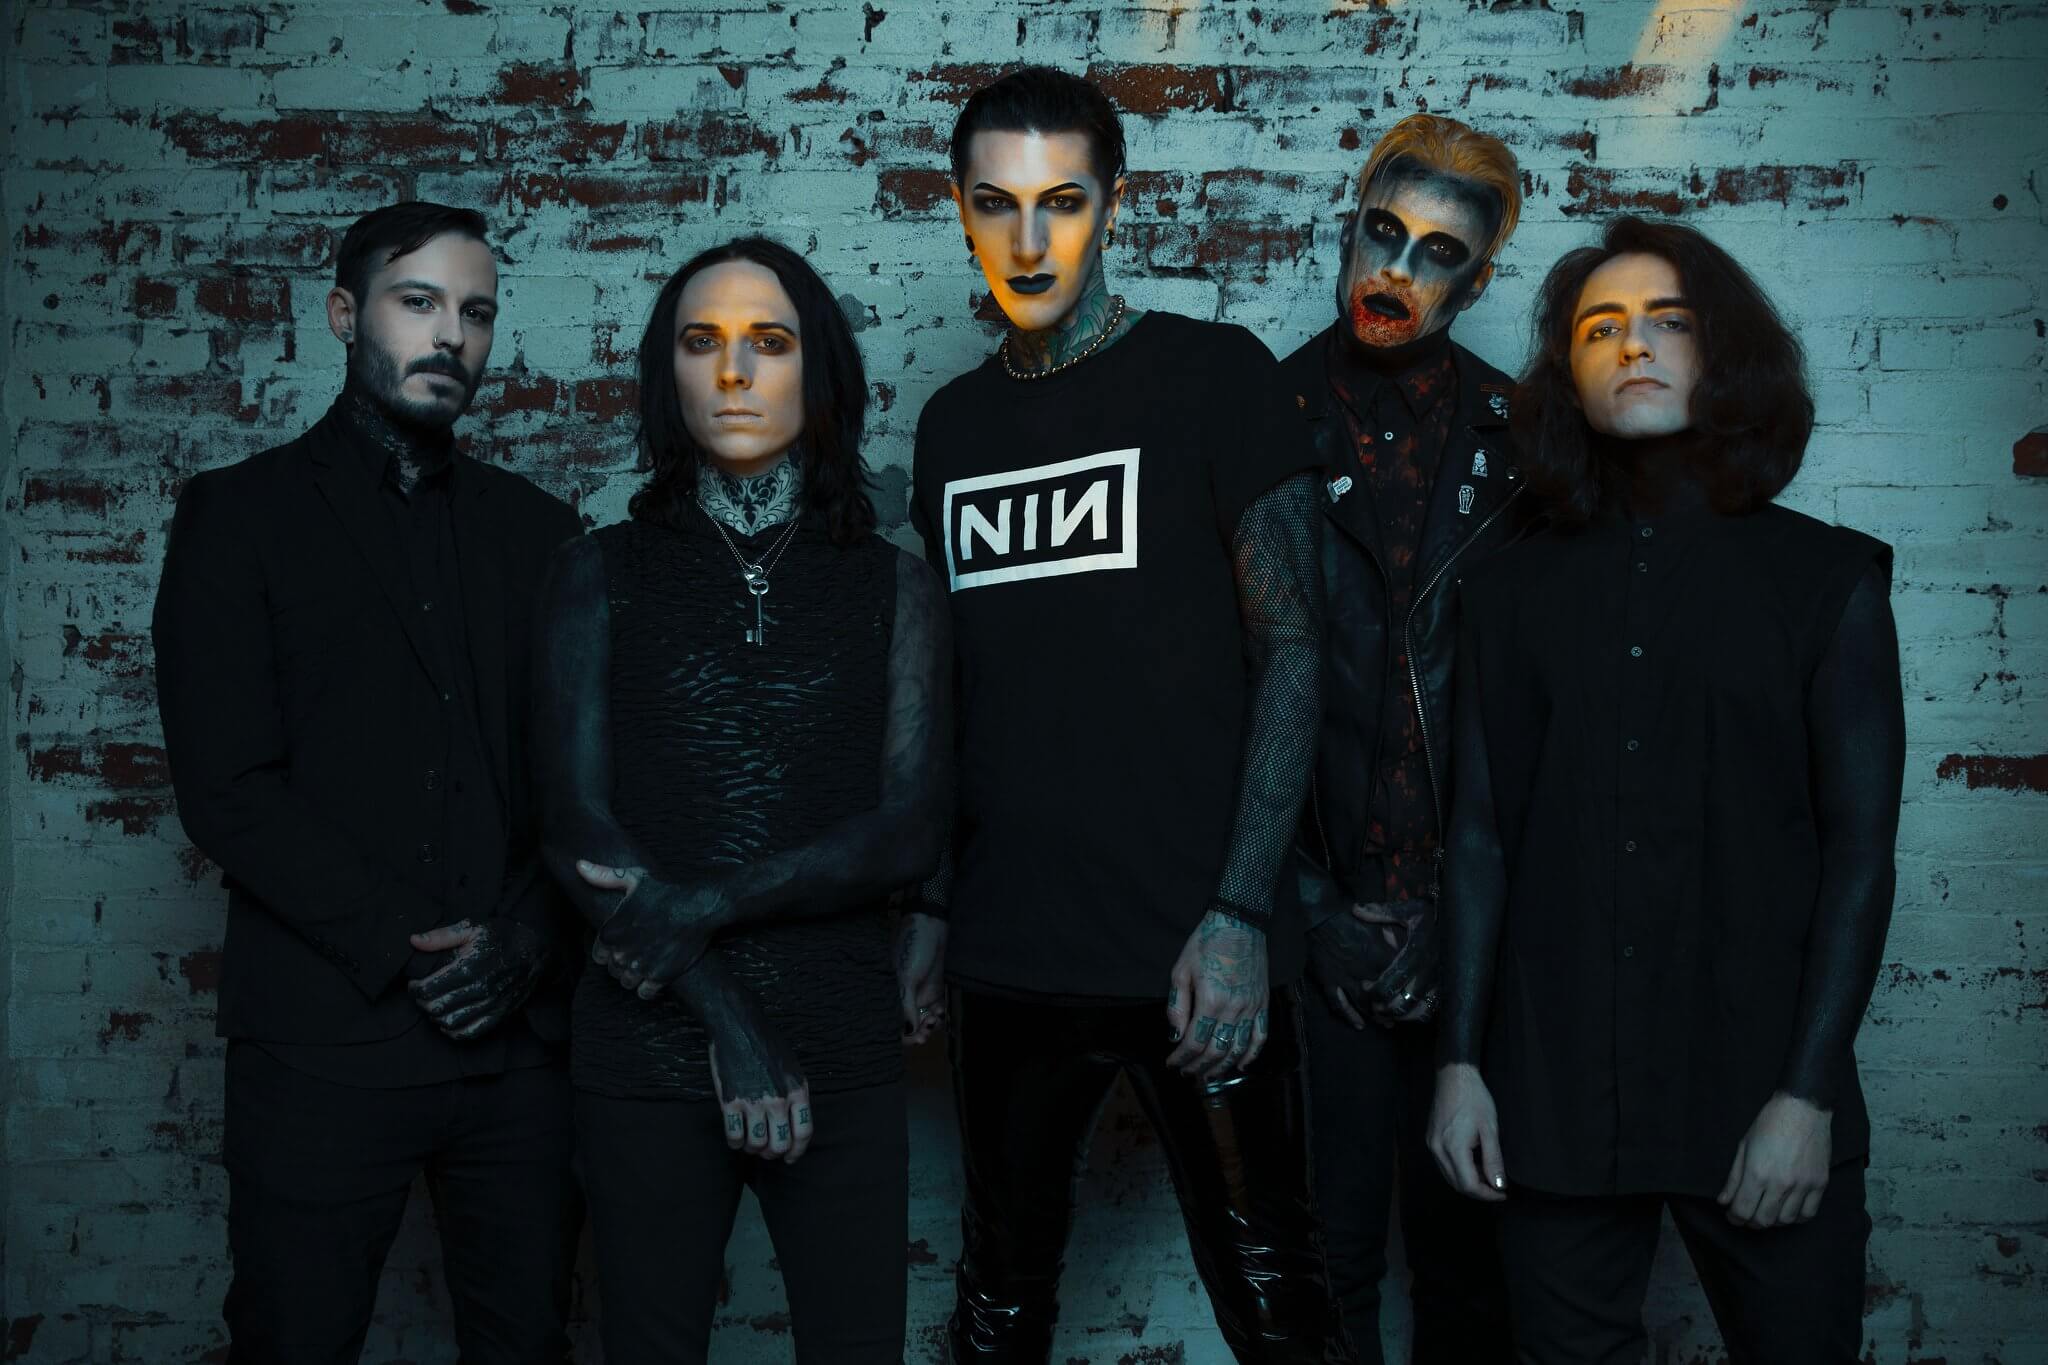 MOTIONLESS IN WHITE COVER THE KILLERS’ “SOMEBODY TOLD ME”